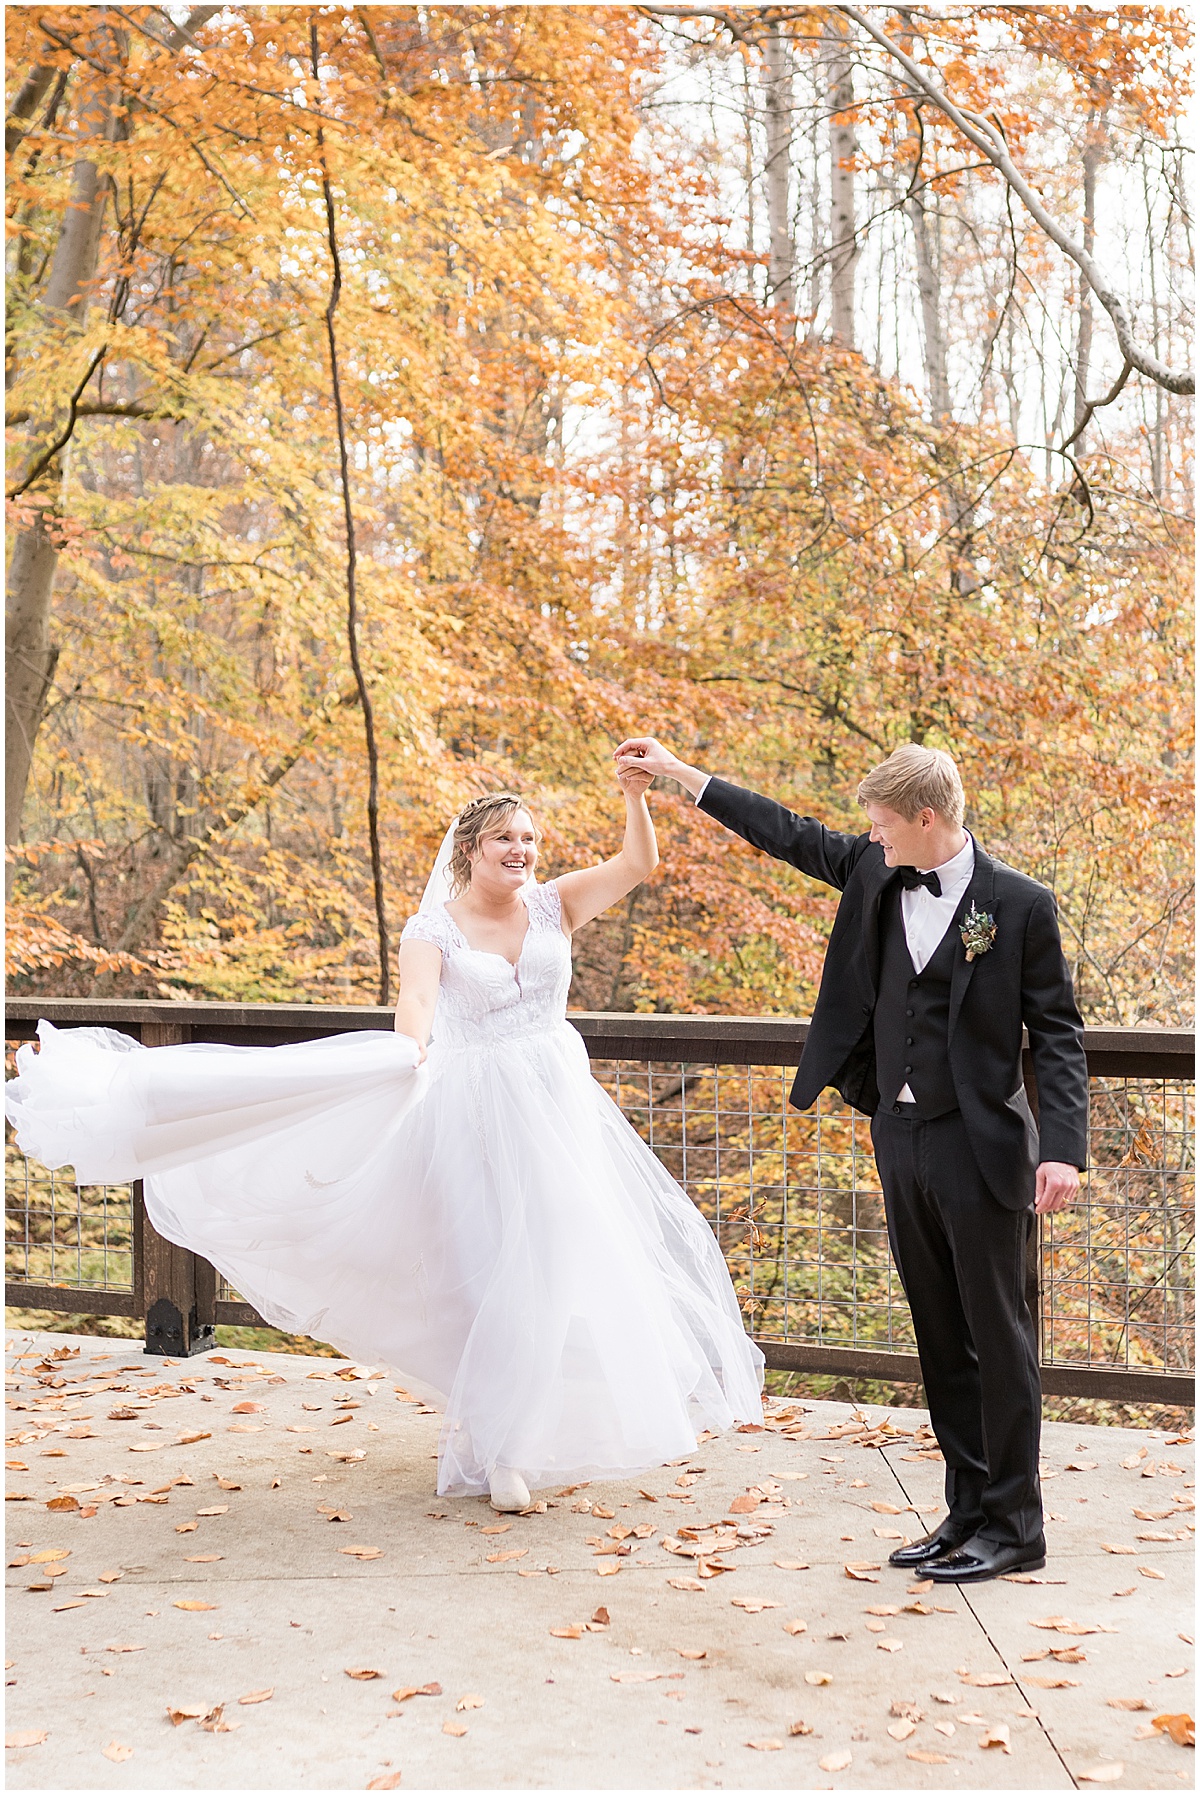 Bride and groom dance outside fall wedding at 3 Fat Labs in Greencastle, Indiana photographed by Victoria Rayburn Photography